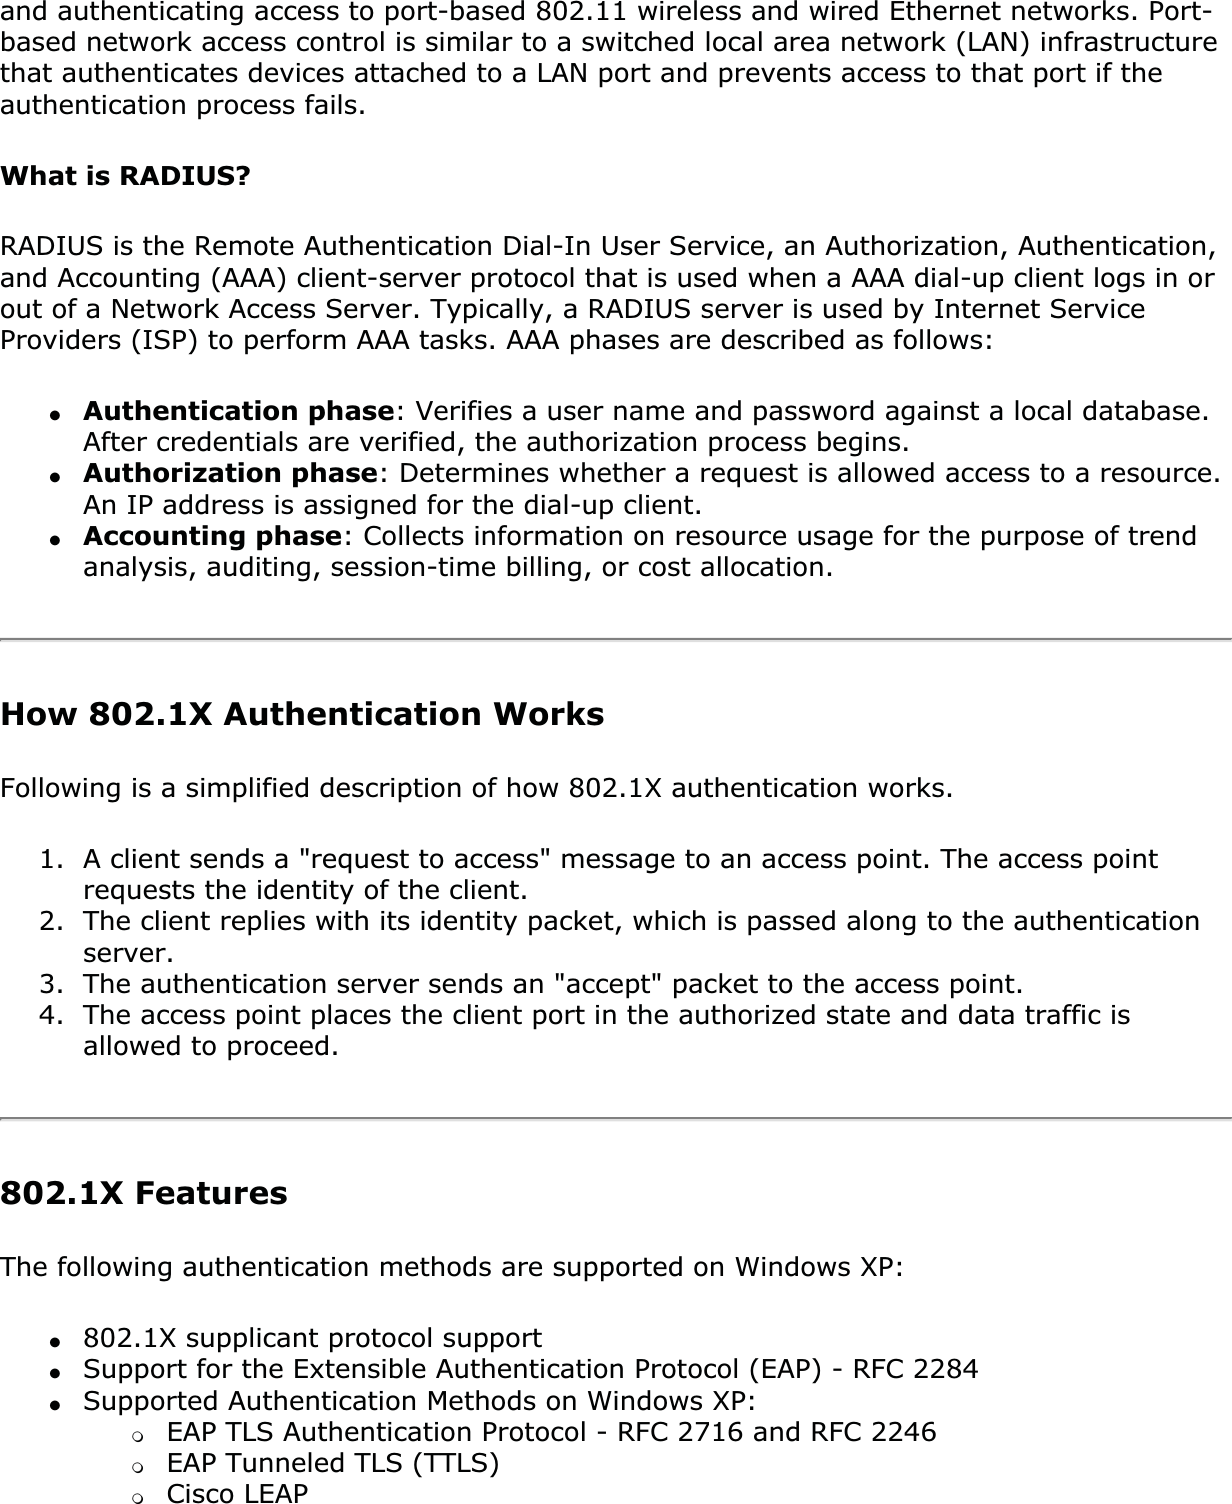 and authenticating access to port-based 802.11 wireless and wired Ethernet networks. Port-based network access control is similar to a switched local area network (LAN) infrastructure that authenticates devices attached to a LAN port and prevents access to that port if the authentication process fails.What is RADIUS?RADIUS is the Remote Authentication Dial-In User Service, an Authorization, Authentication, and Accounting (AAA) client-server protocol that is used when a AAA dial-up client logs in or out of a Network Access Server. Typically, a RADIUS server is used by Internet Service Providers (ISP) to perform AAA tasks. AAA phases are described as follows:●Authentication phase: Verifies a user name and password against a local database. After credentials are verified, the authorization process begins.●Authorization phase: Determines whether a request is allowed access to a resource. An IP address is assigned for the dial-up client.●Accounting phase: Collects information on resource usage for the purpose of trend analysis, auditing, session-time billing, or cost allocation.How 802.1X Authentication WorksFollowing is a simplified description of how 802.1X authentication works.1. A client sends a &quot;request to access&quot; message to an access point. The access point requests the identity of the client. 2. The client replies with its identity packet, which is passed along to the authentication server.3. The authentication server sends an &quot;accept&quot; packet to the access point.4. The access point places the client port in the authorized state and data traffic is allowed to proceed.802.1X FeaturesThe following authentication methods are supported on Windows XP:●802.1X supplicant protocol support●Support for the Extensible Authentication Protocol (EAP) - RFC 2284●Supported Authentication Methods on Windows XP: ❍EAP TLS Authentication Protocol - RFC 2716 and RFC 2246 ❍EAP Tunneled TLS (TTLS) ❍Cisco LEAP 